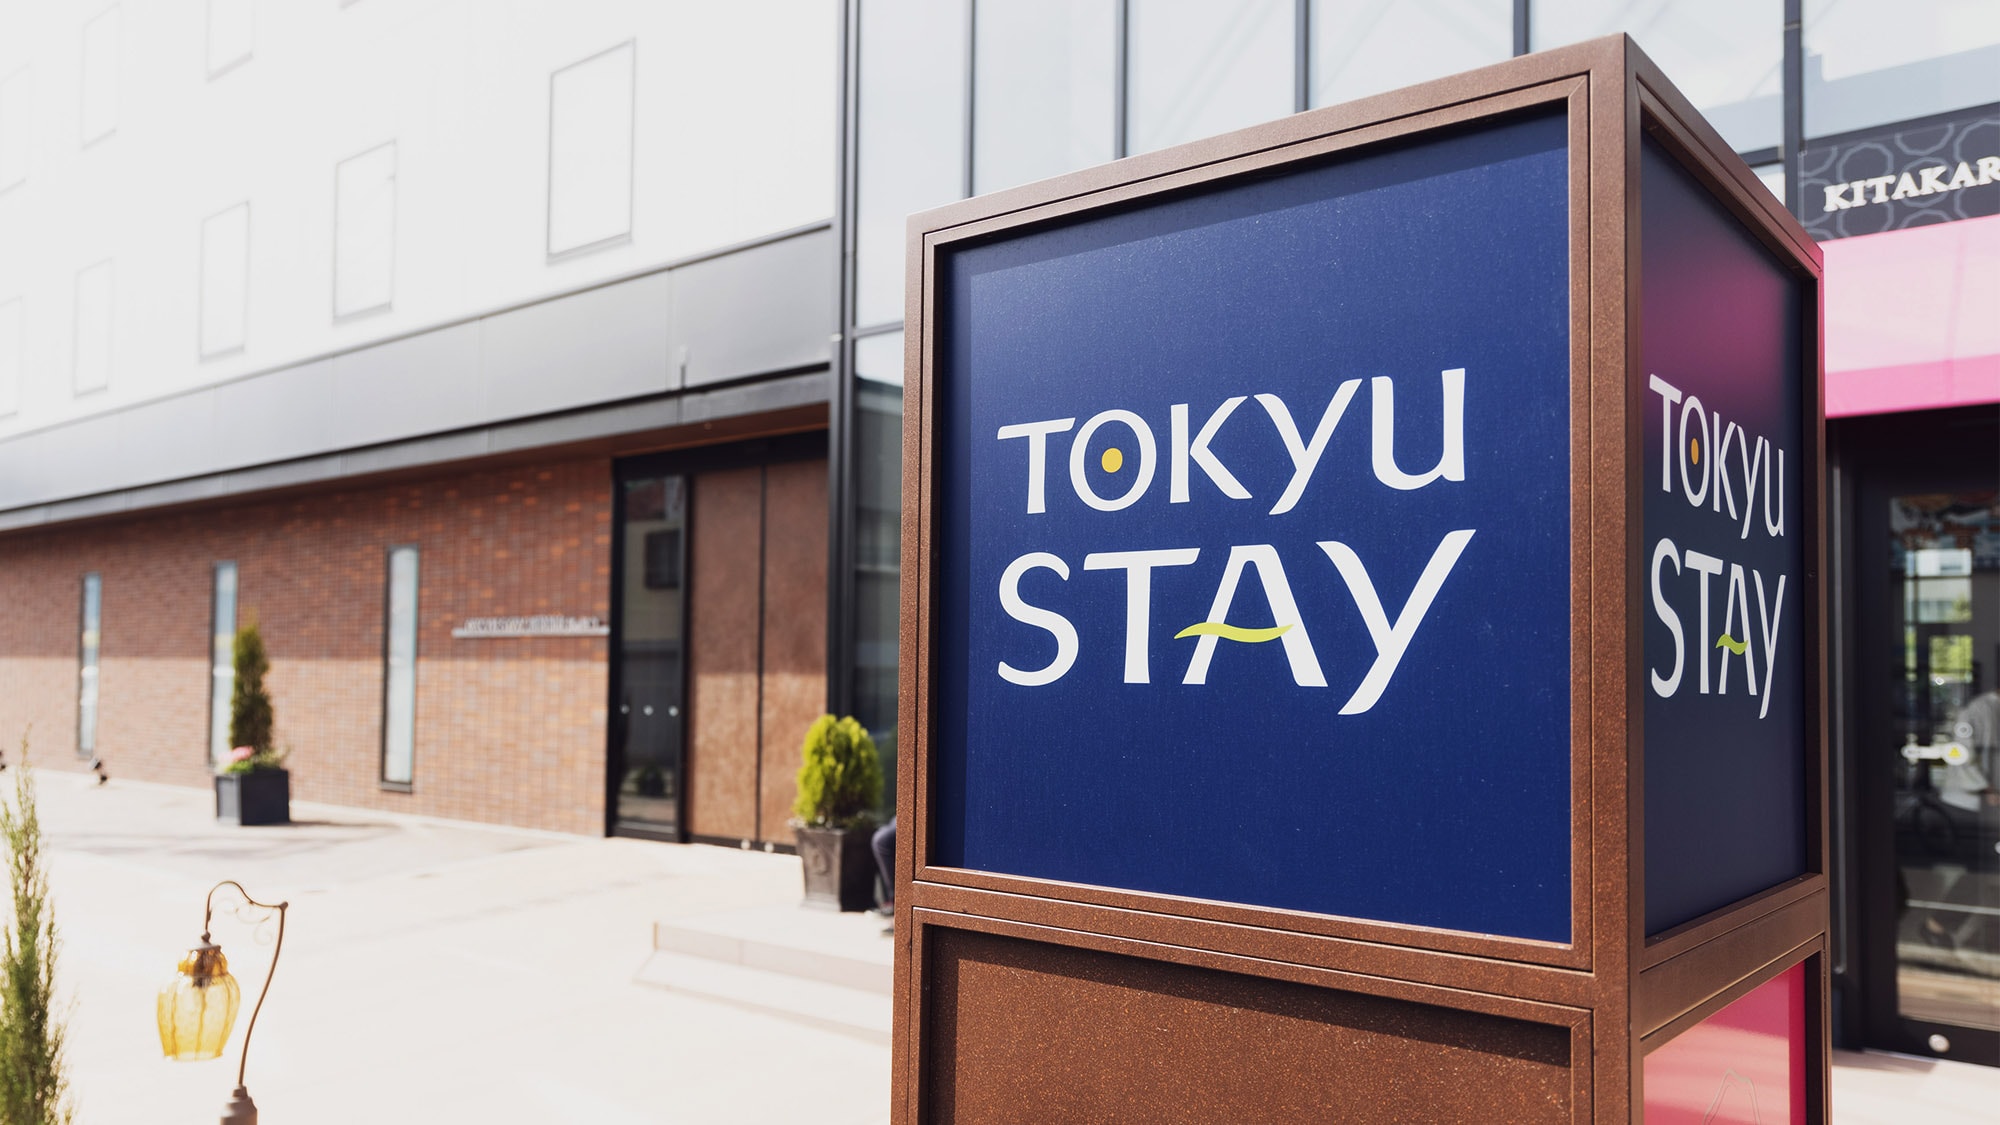 ■Tokyu Stay Logo／Look for this blue sign.